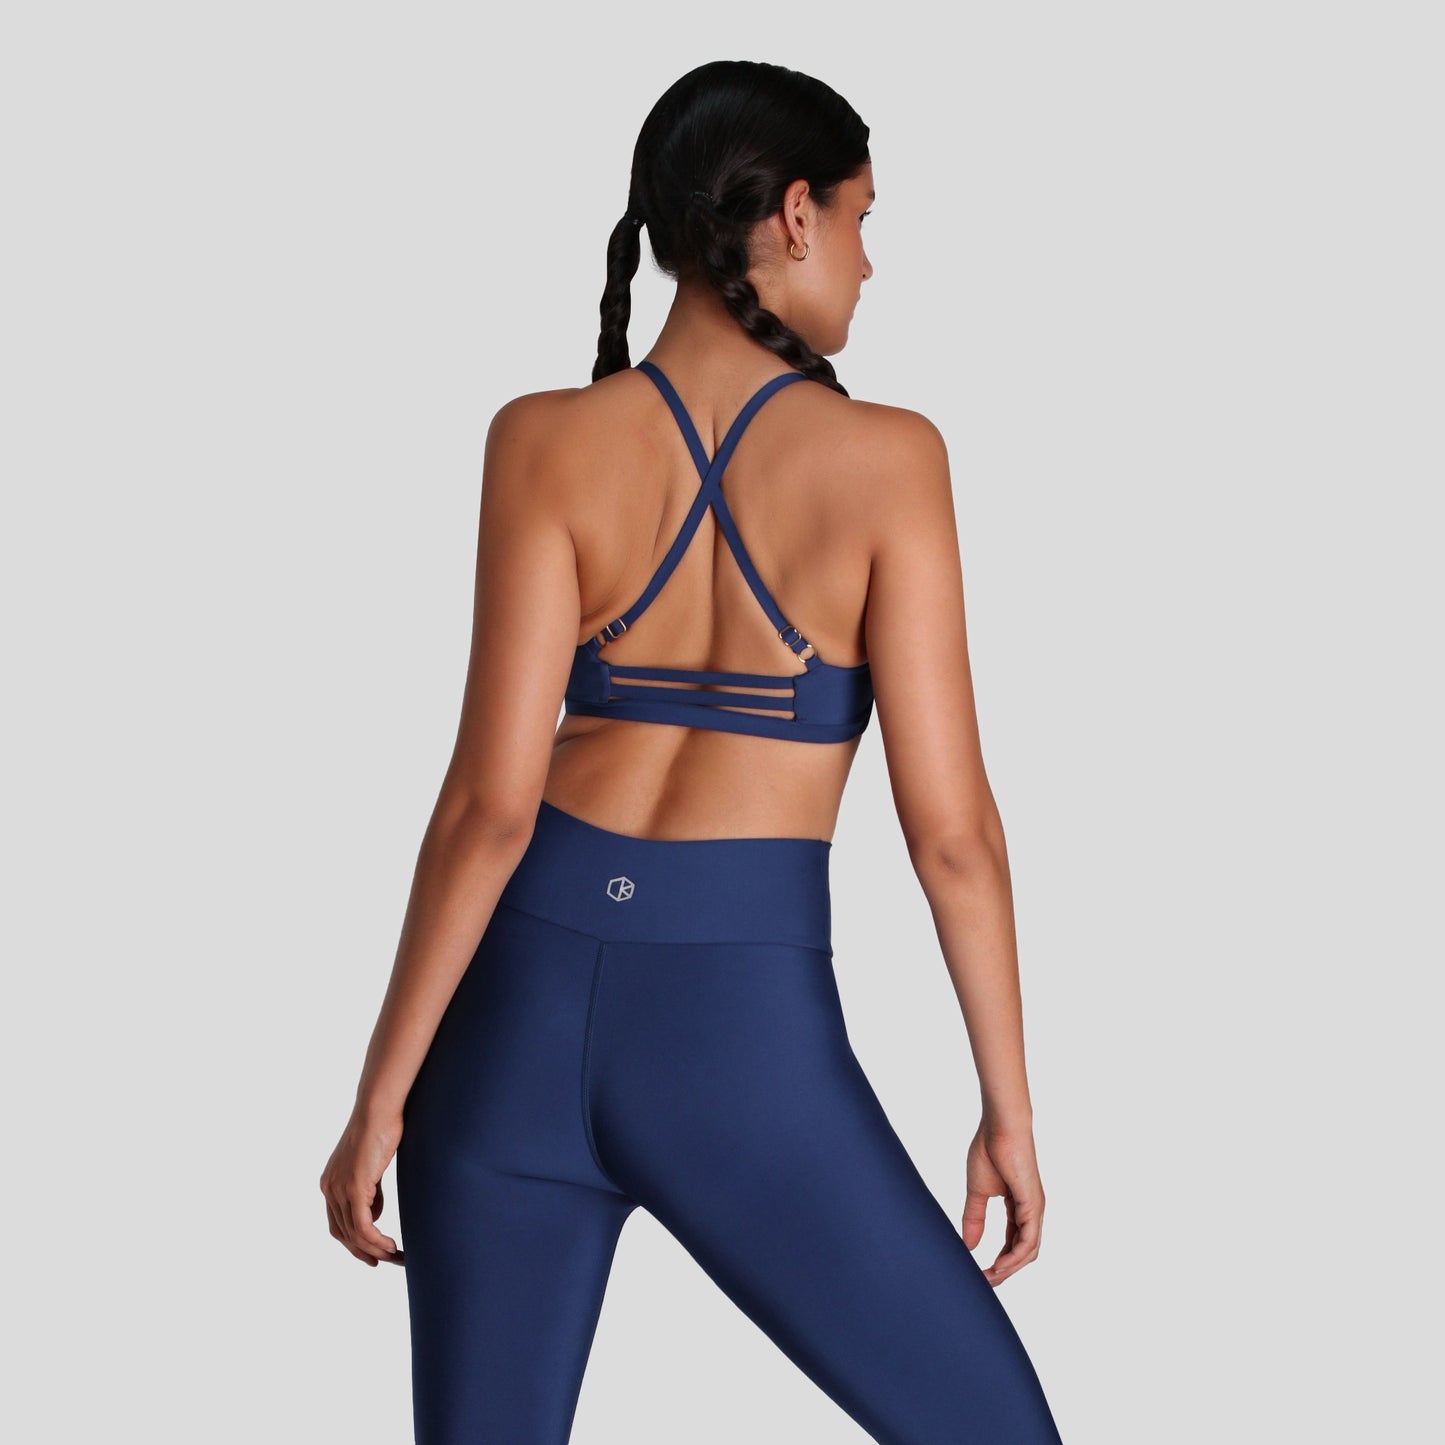 TOP for exercising with adjustment